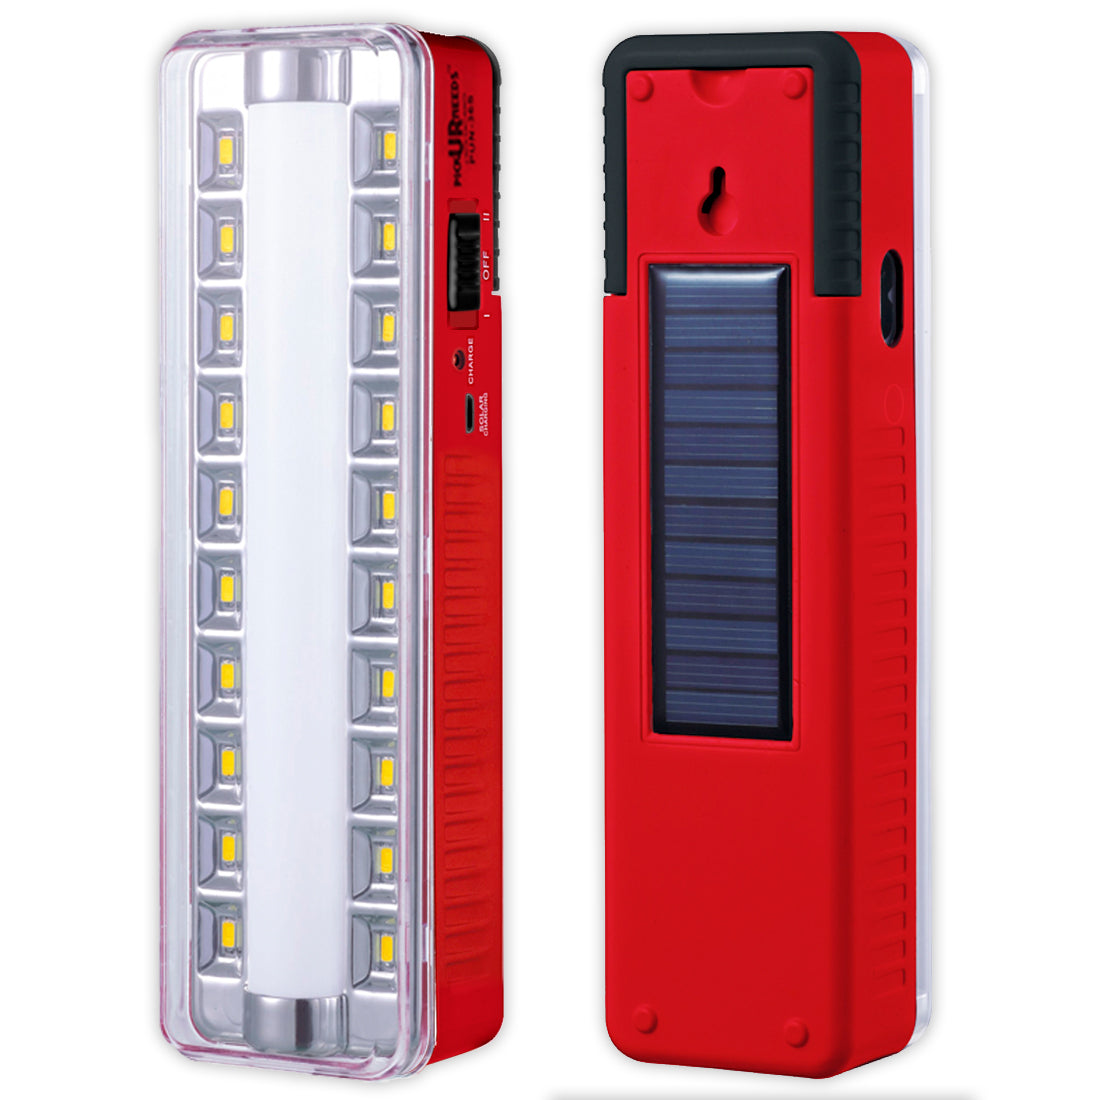 Pick Ur Needs Rechargeable 20 SMD+ Tube with in Built Solar Home Emergency LED Lantern Floor Lamp Light